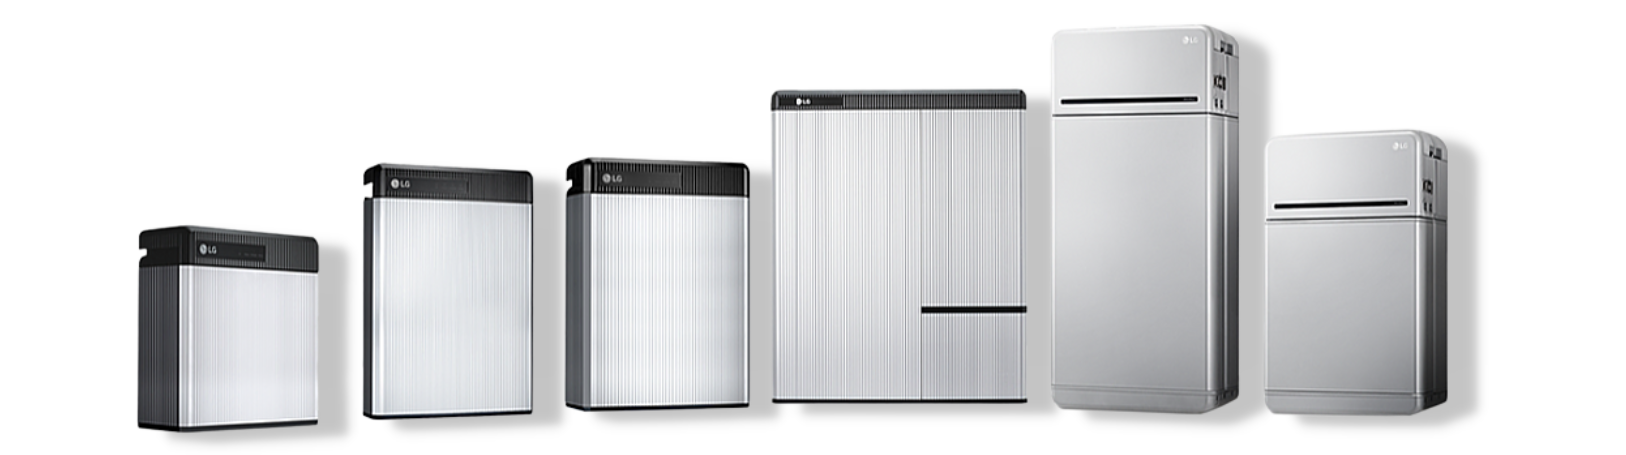 The complete LG RESU battery range including the new Prime battery series - Image credit LG